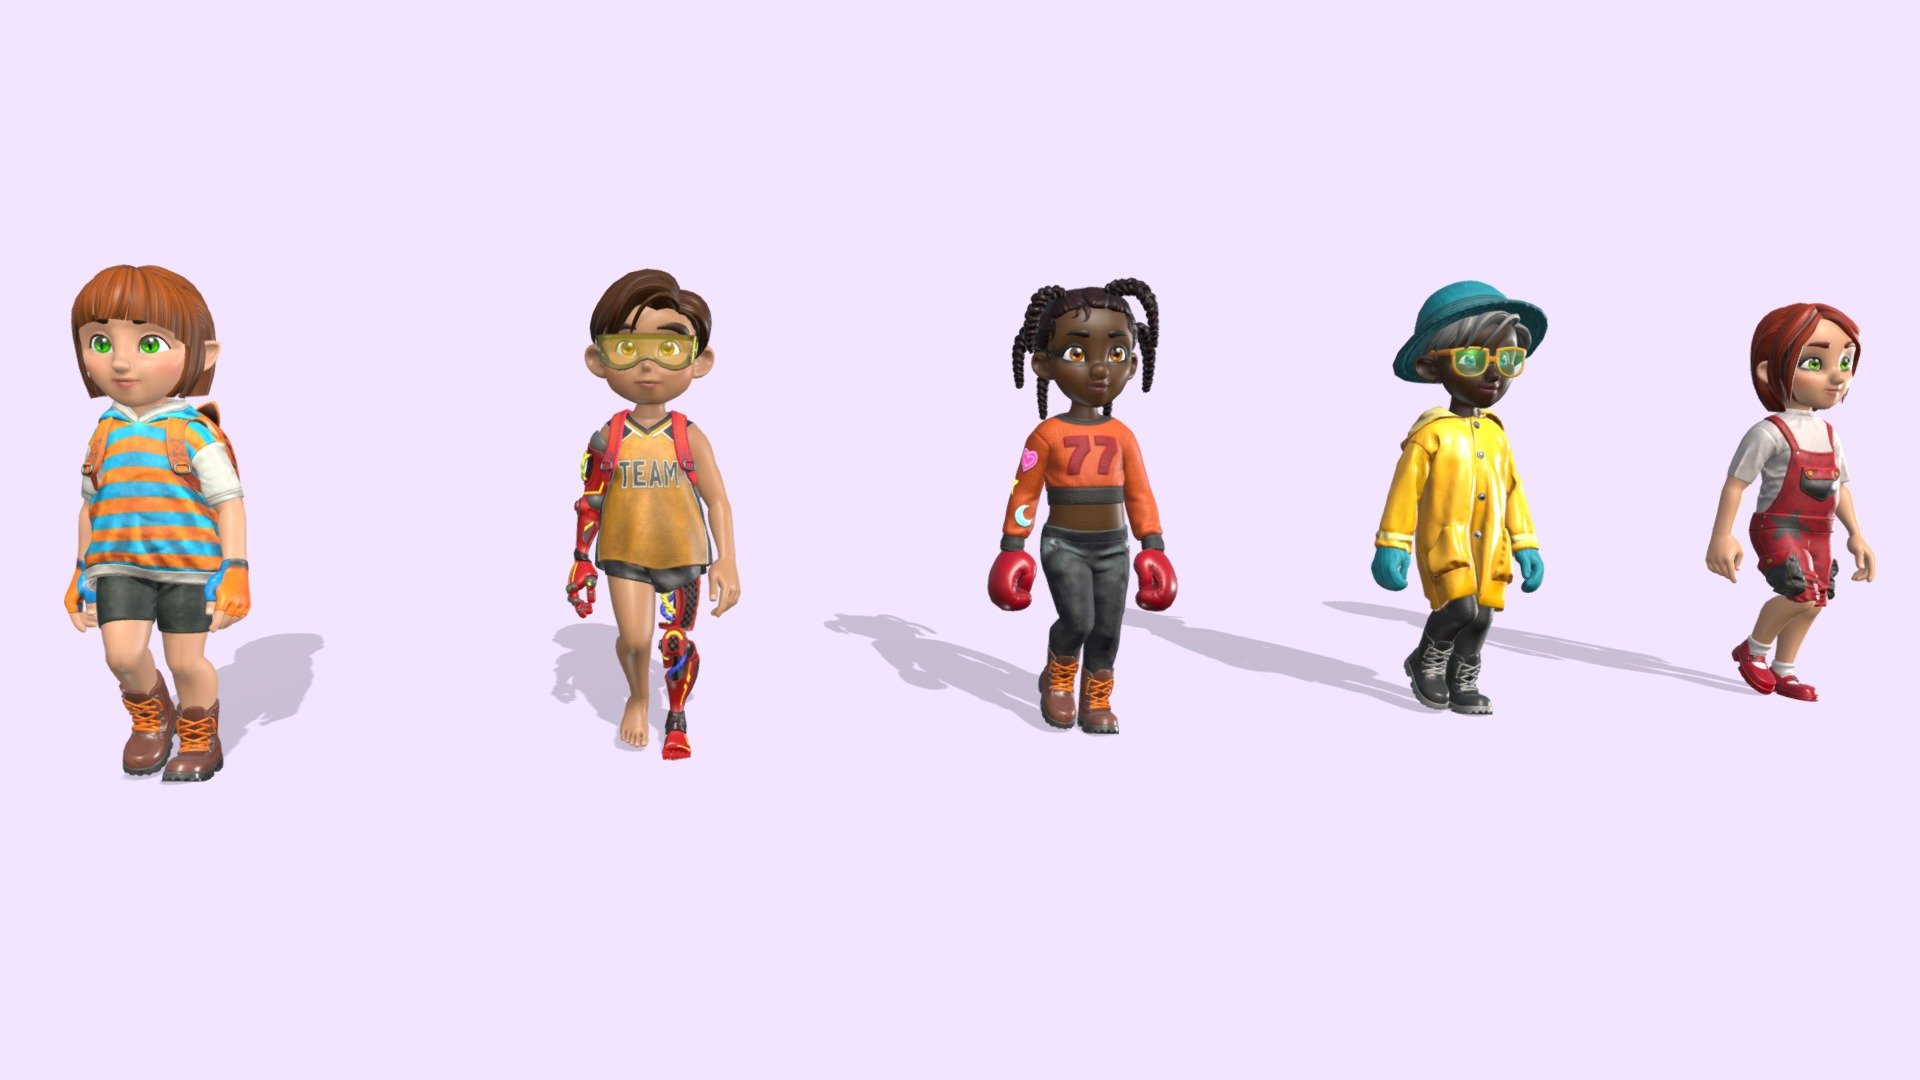 Gazpacha, Wires, Nora, Urkel and Pepa Characters from the KEKOS package.

Ready to import in your preferred videogame engine or 3D software.

Characters included:

5

FORMAT:

FBX

POLYGON COUNT:

~31k Triangles average each character

TEXTURES:

PBR Textures: Diffuse + Normal map + Metallic (R) / Smoothness (A) / Ambient Oclussion (G) + Emmisive

Size: 2048x2048 for most of the assets. A few 4096x4096 for detailed parts.

PNG format

Prerenderer icons for garments, hair, eyes, skin and complements.

RIG:




Full human rig.

27 blendshapes for face expresions.

ANIMATIONS:




Idle

Walk

Run

Jump

Jump Inplace

Jump In Air Inplace

Dance

Punch

Punch Idle

Preview all animations in a single character model: Keko link - KEKOS - 5 Characters Pack - Buy Royalty Free 3D model by Mameshiba Games (@MameshibaGames) 3d model